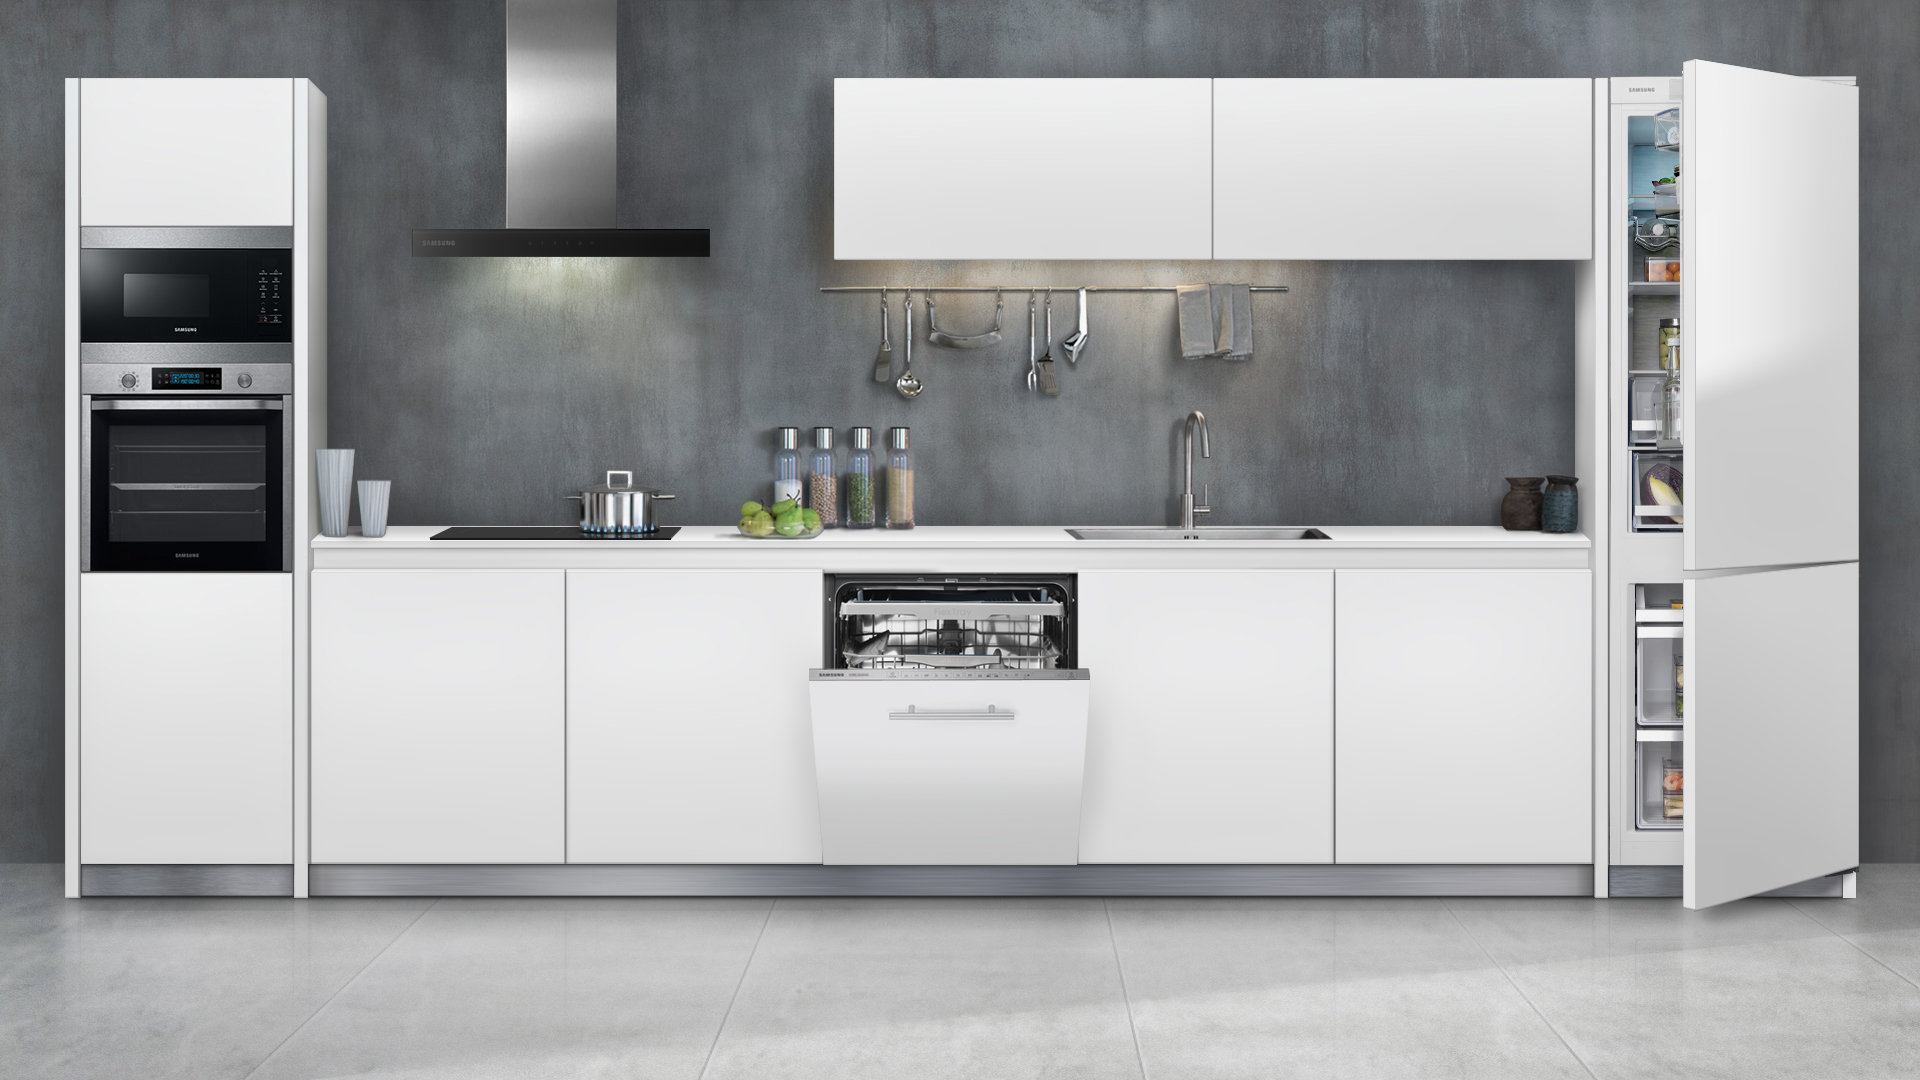 Samsung Unveils Three New Built In Kitchen Appliance Lineups Designed For The Contemporary European Consumer Samsung Newsroom Global Media Library